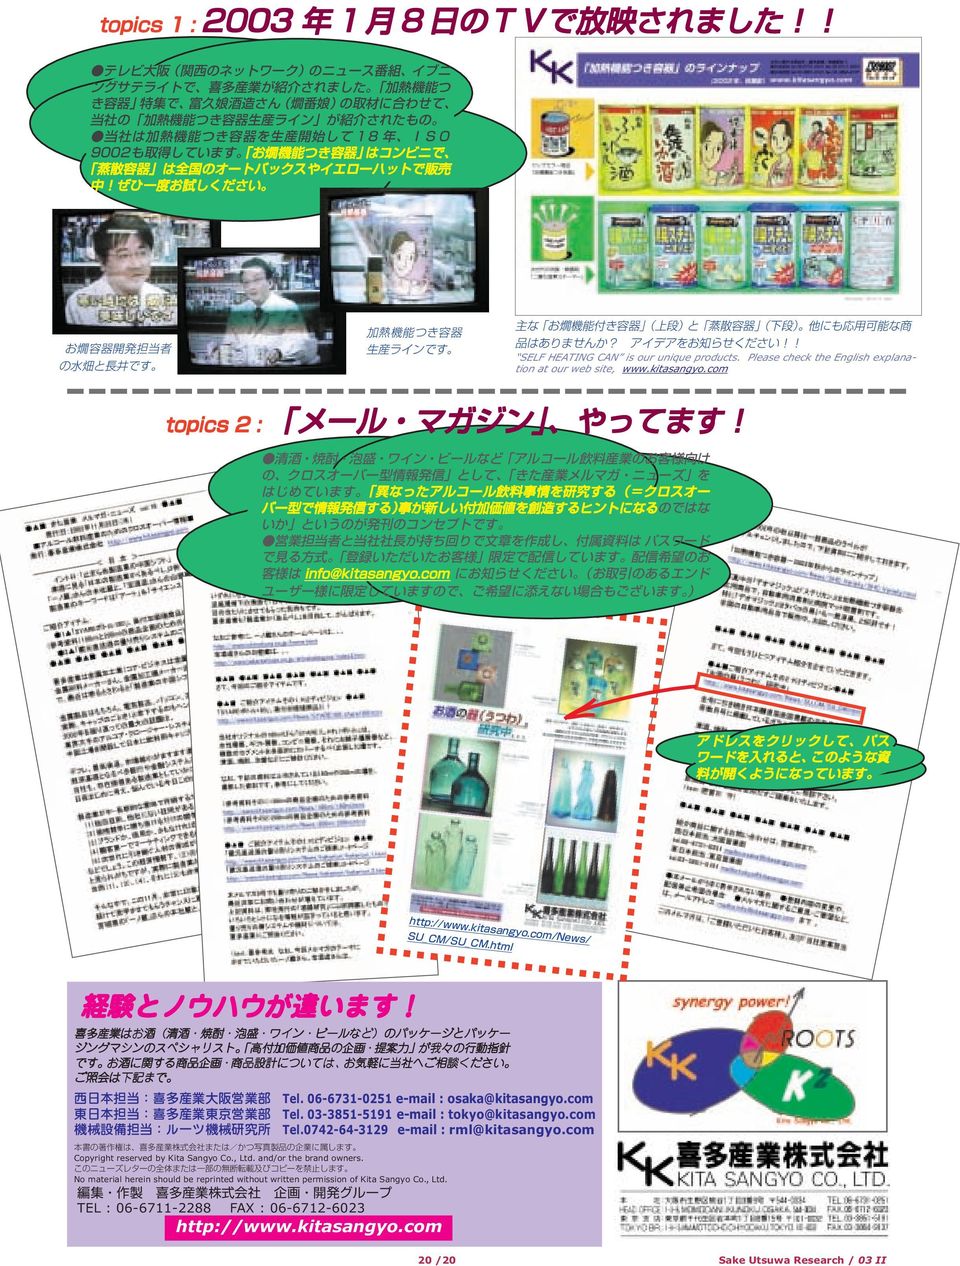 com Copyright reserved by Kita Sangyo Co., Ltd. and/or the brand owners.